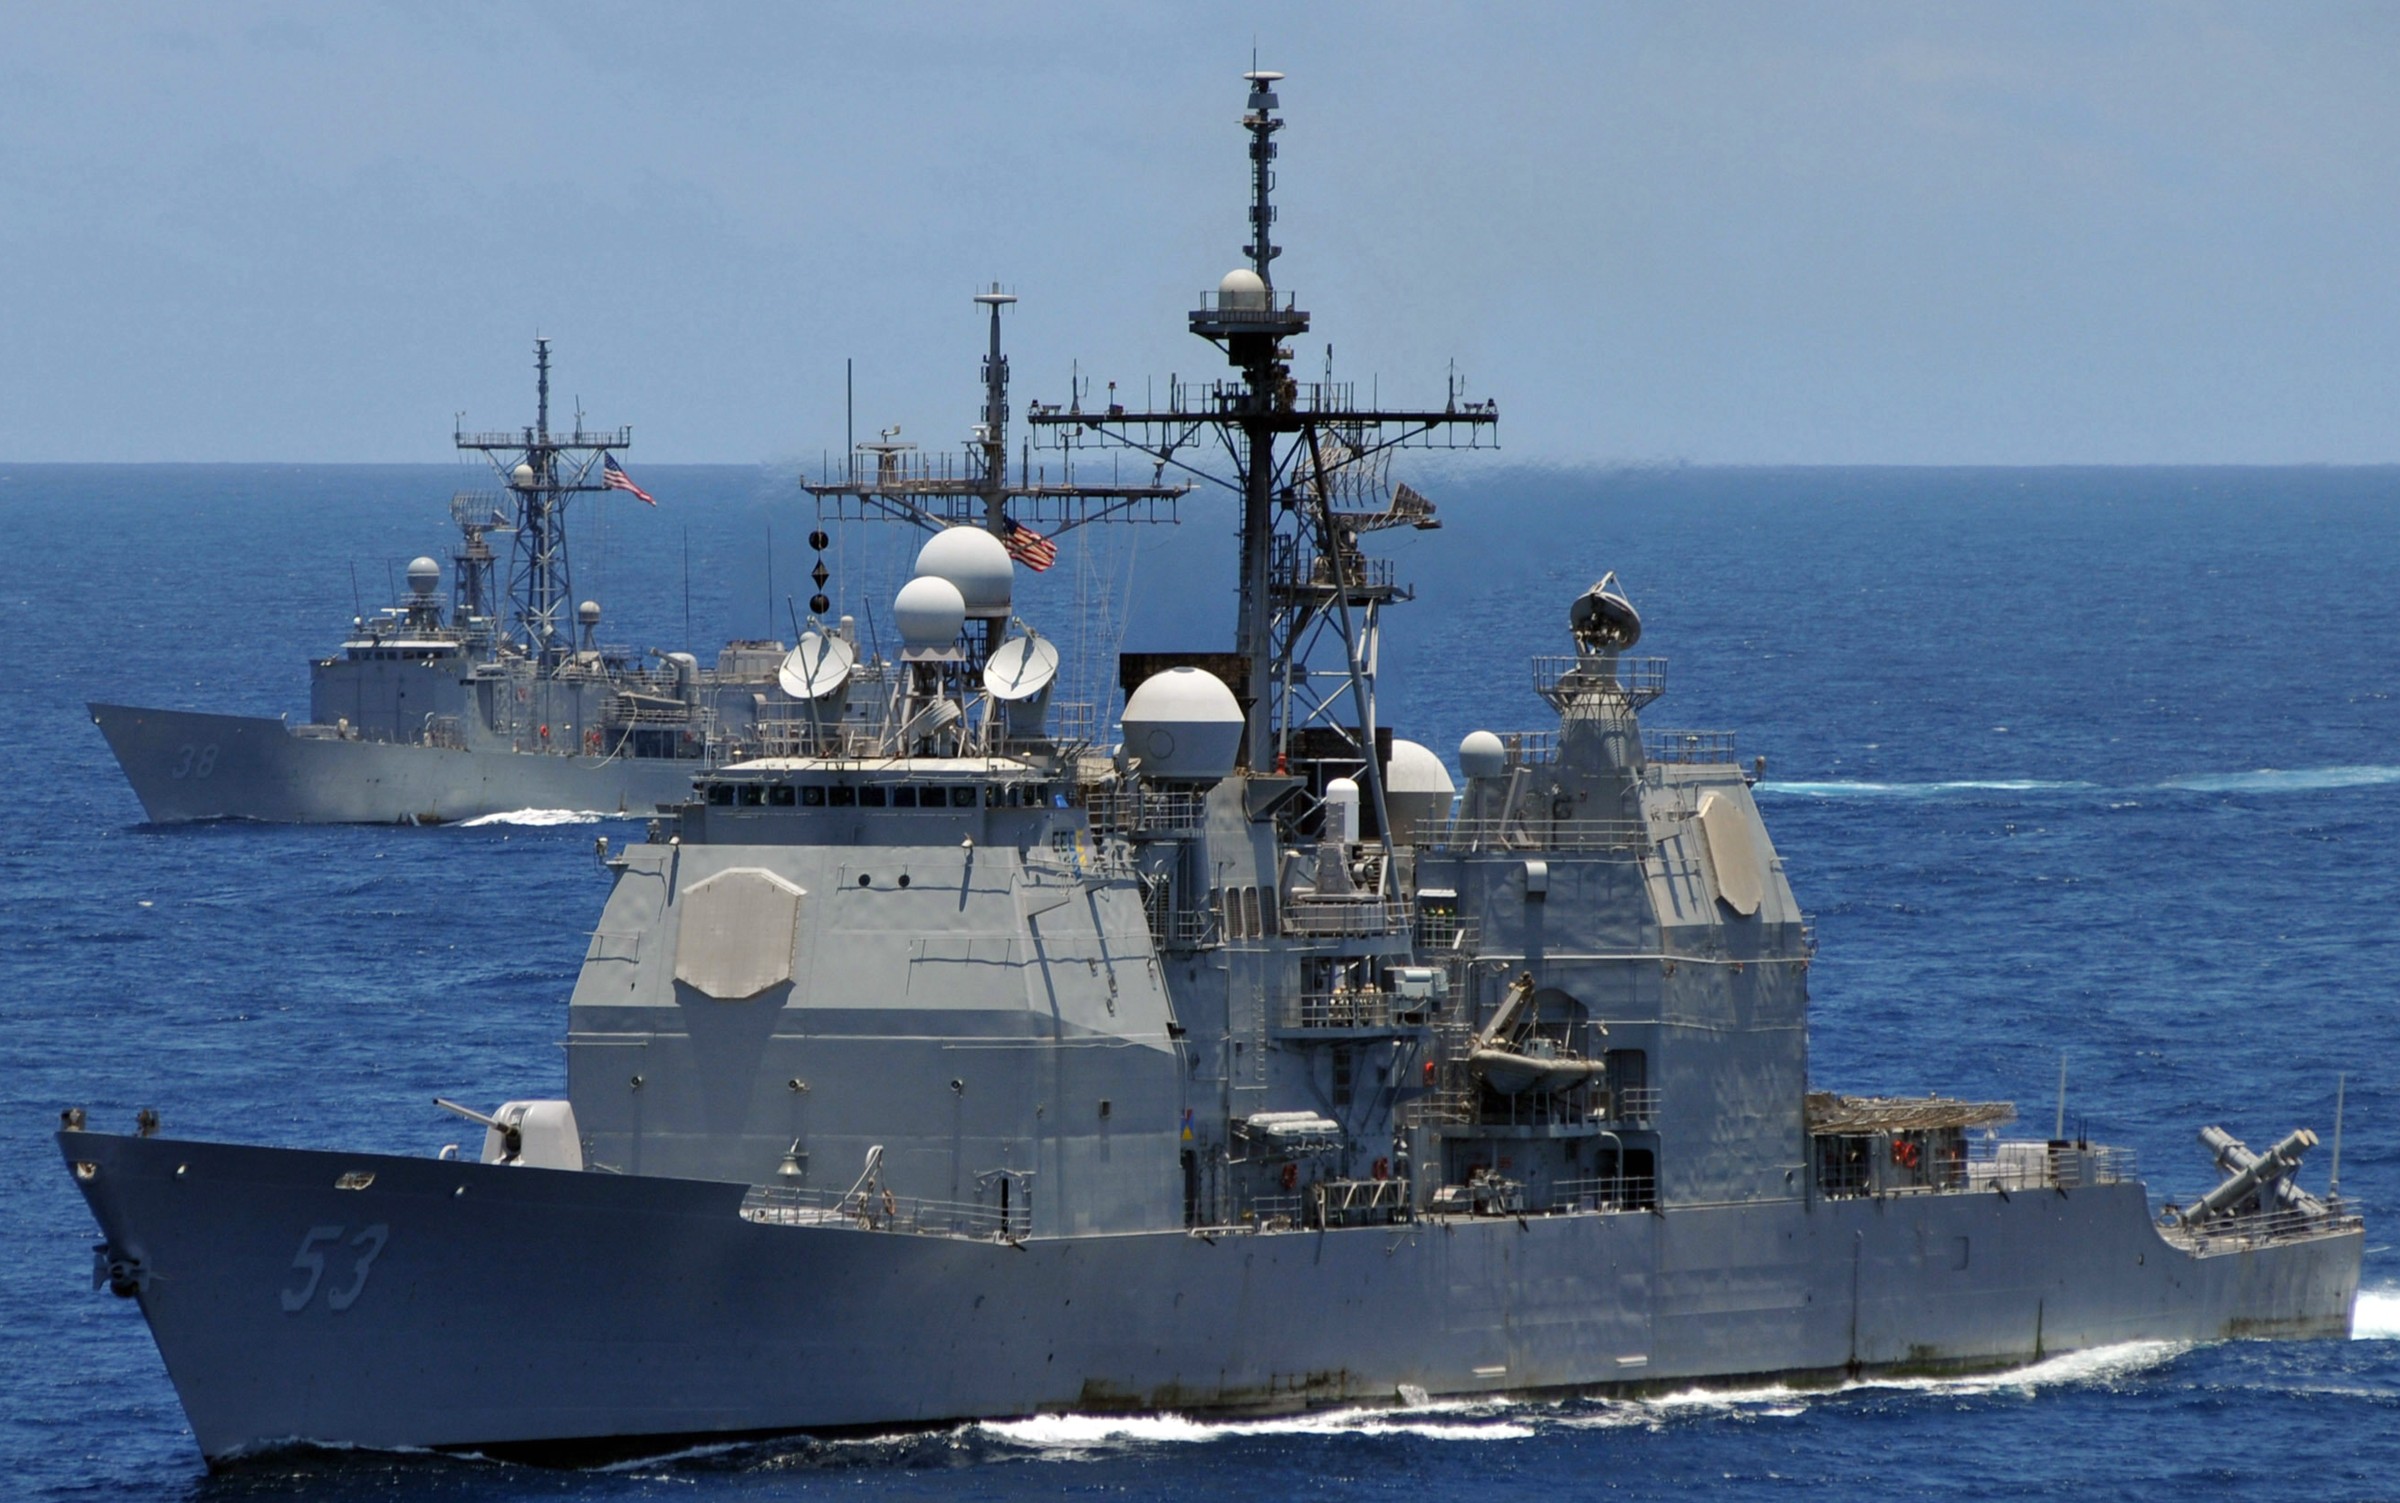 cg-53 uss mobile bay ticonderoga class guided missile cruiser aegis us navy indian ocean 44